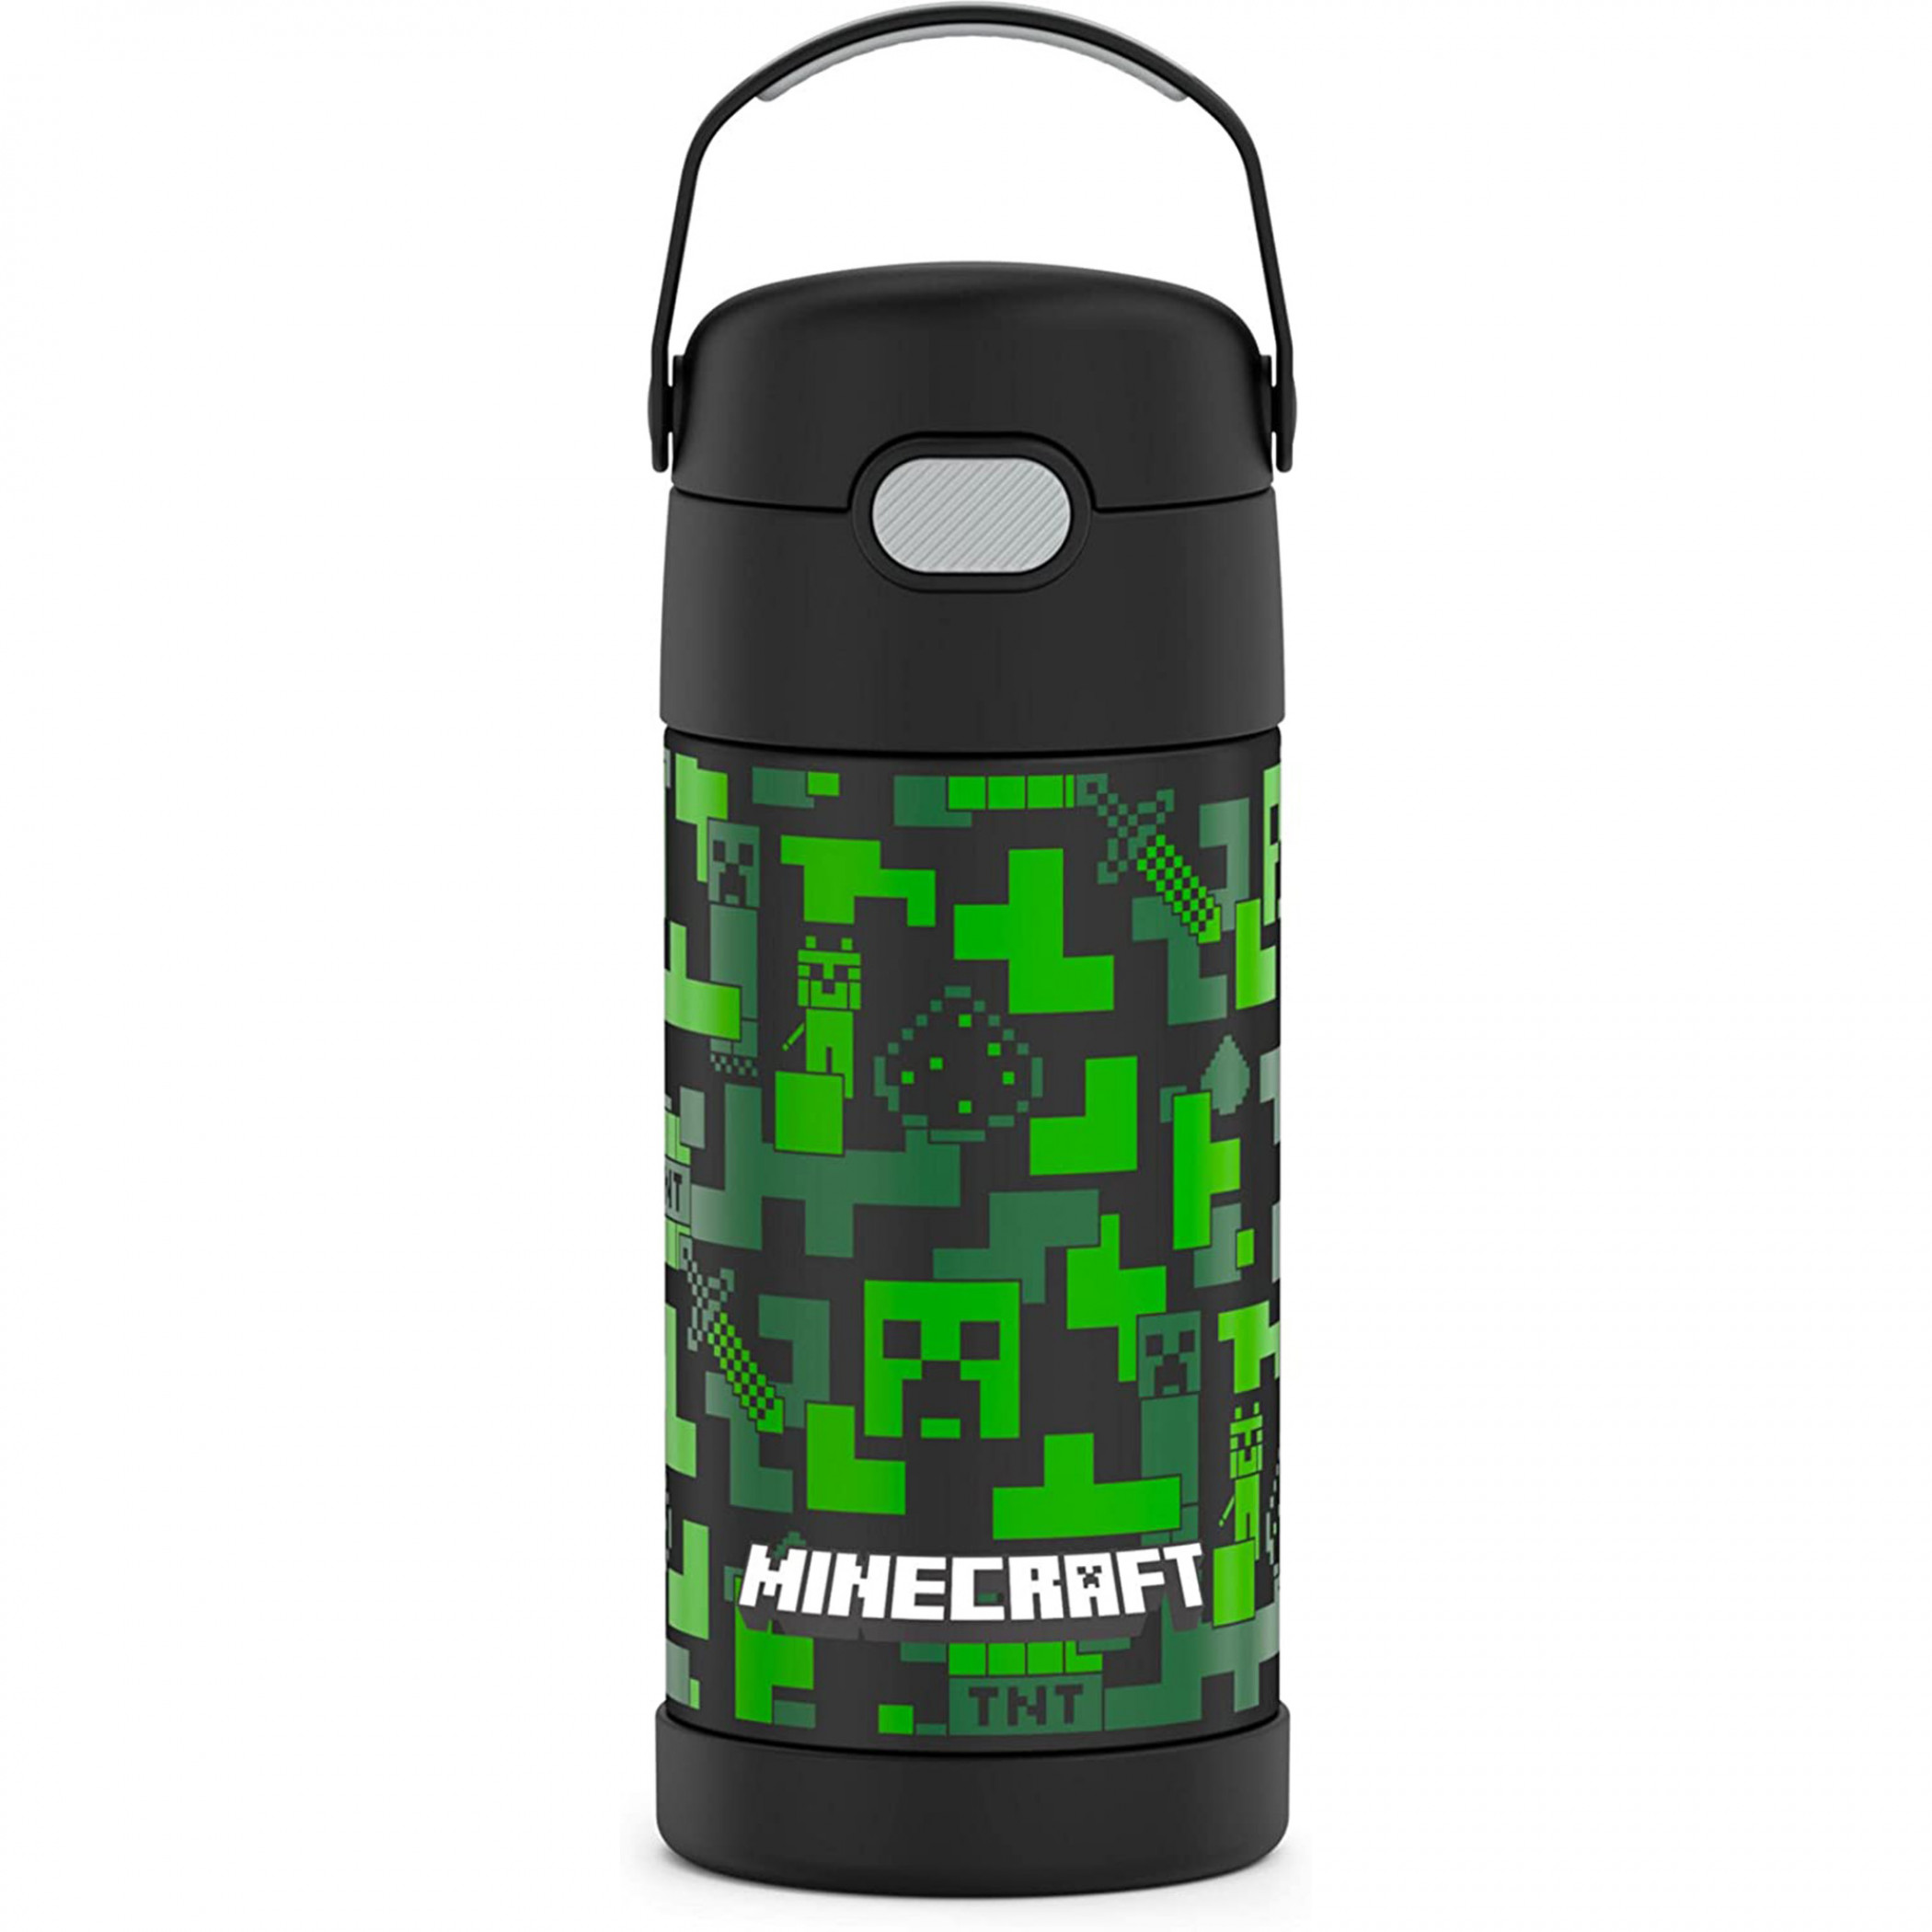 Minecraft Creeper Camo Stainless Steel 12oz Thermos Funtainer